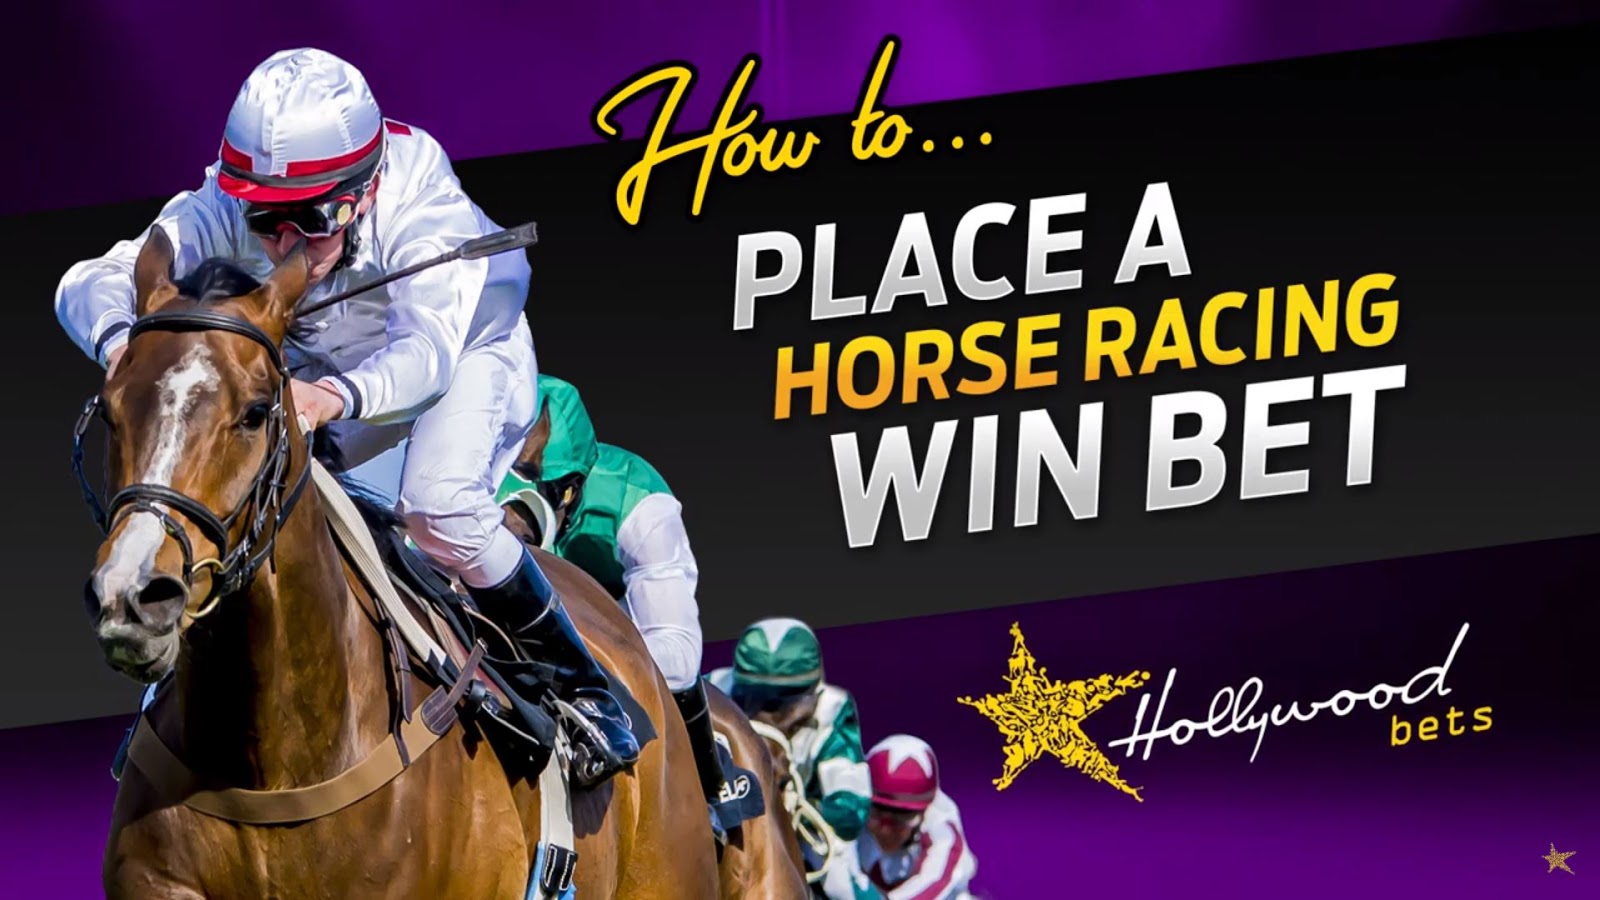 How To Place a Horse Racing Bet with Hollywoodbets - Youtube Videos